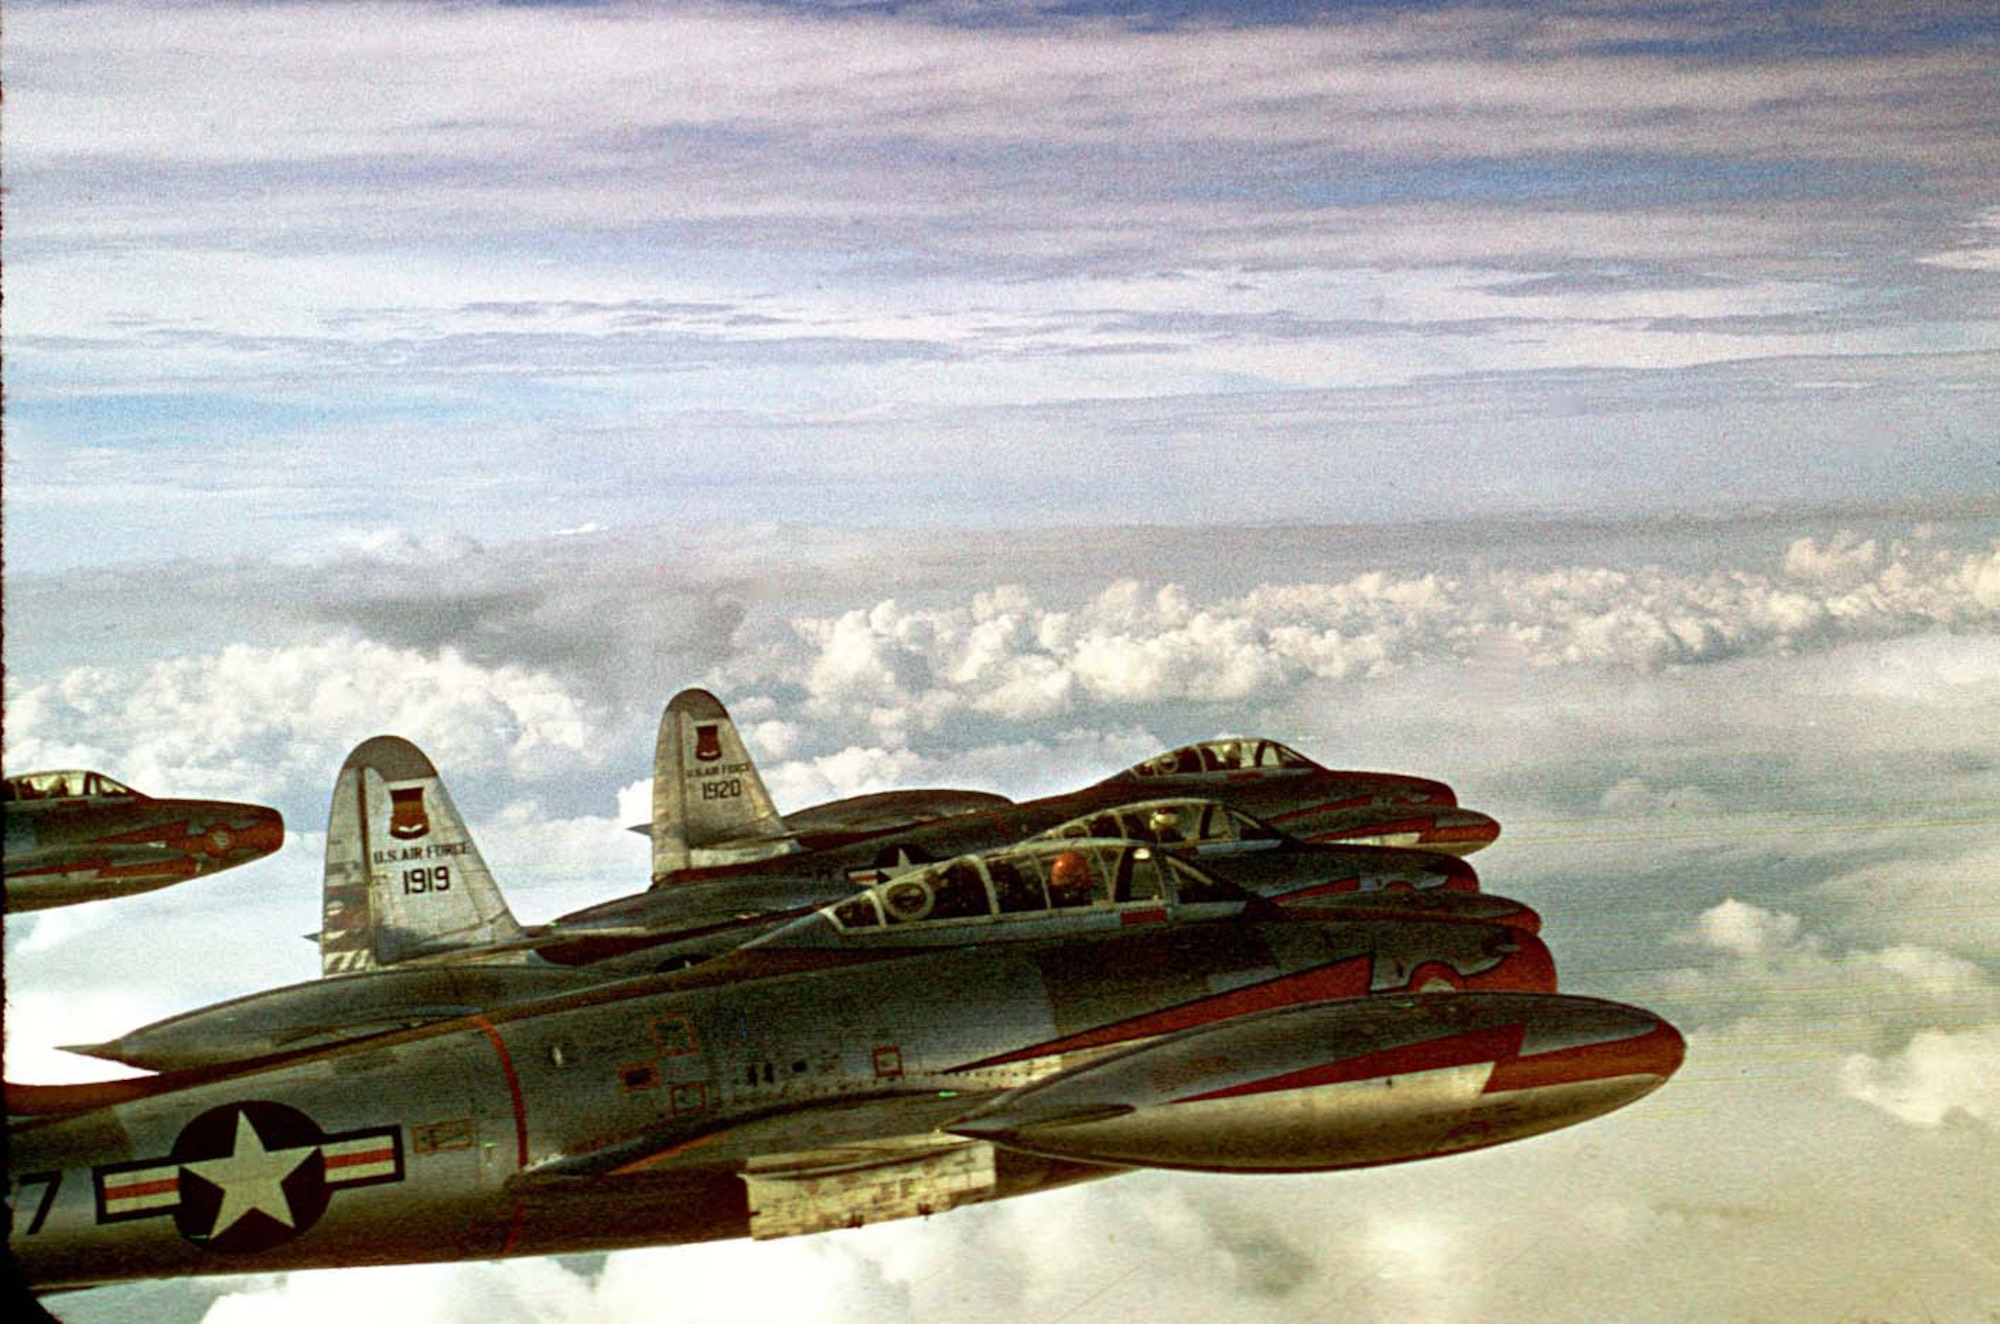 Republic F-84G Thunderjets of the 55th Fighter Bomber Squadron cruise over
the Atlantic Ocean enroute to England in 1952. In a few months, the 20th
Fighter Bomber Wing had developed tactics for a nuclear strike mission, the
first USAF fighter unit to pick up a nuclear role. (U.S. Air Force photo)
